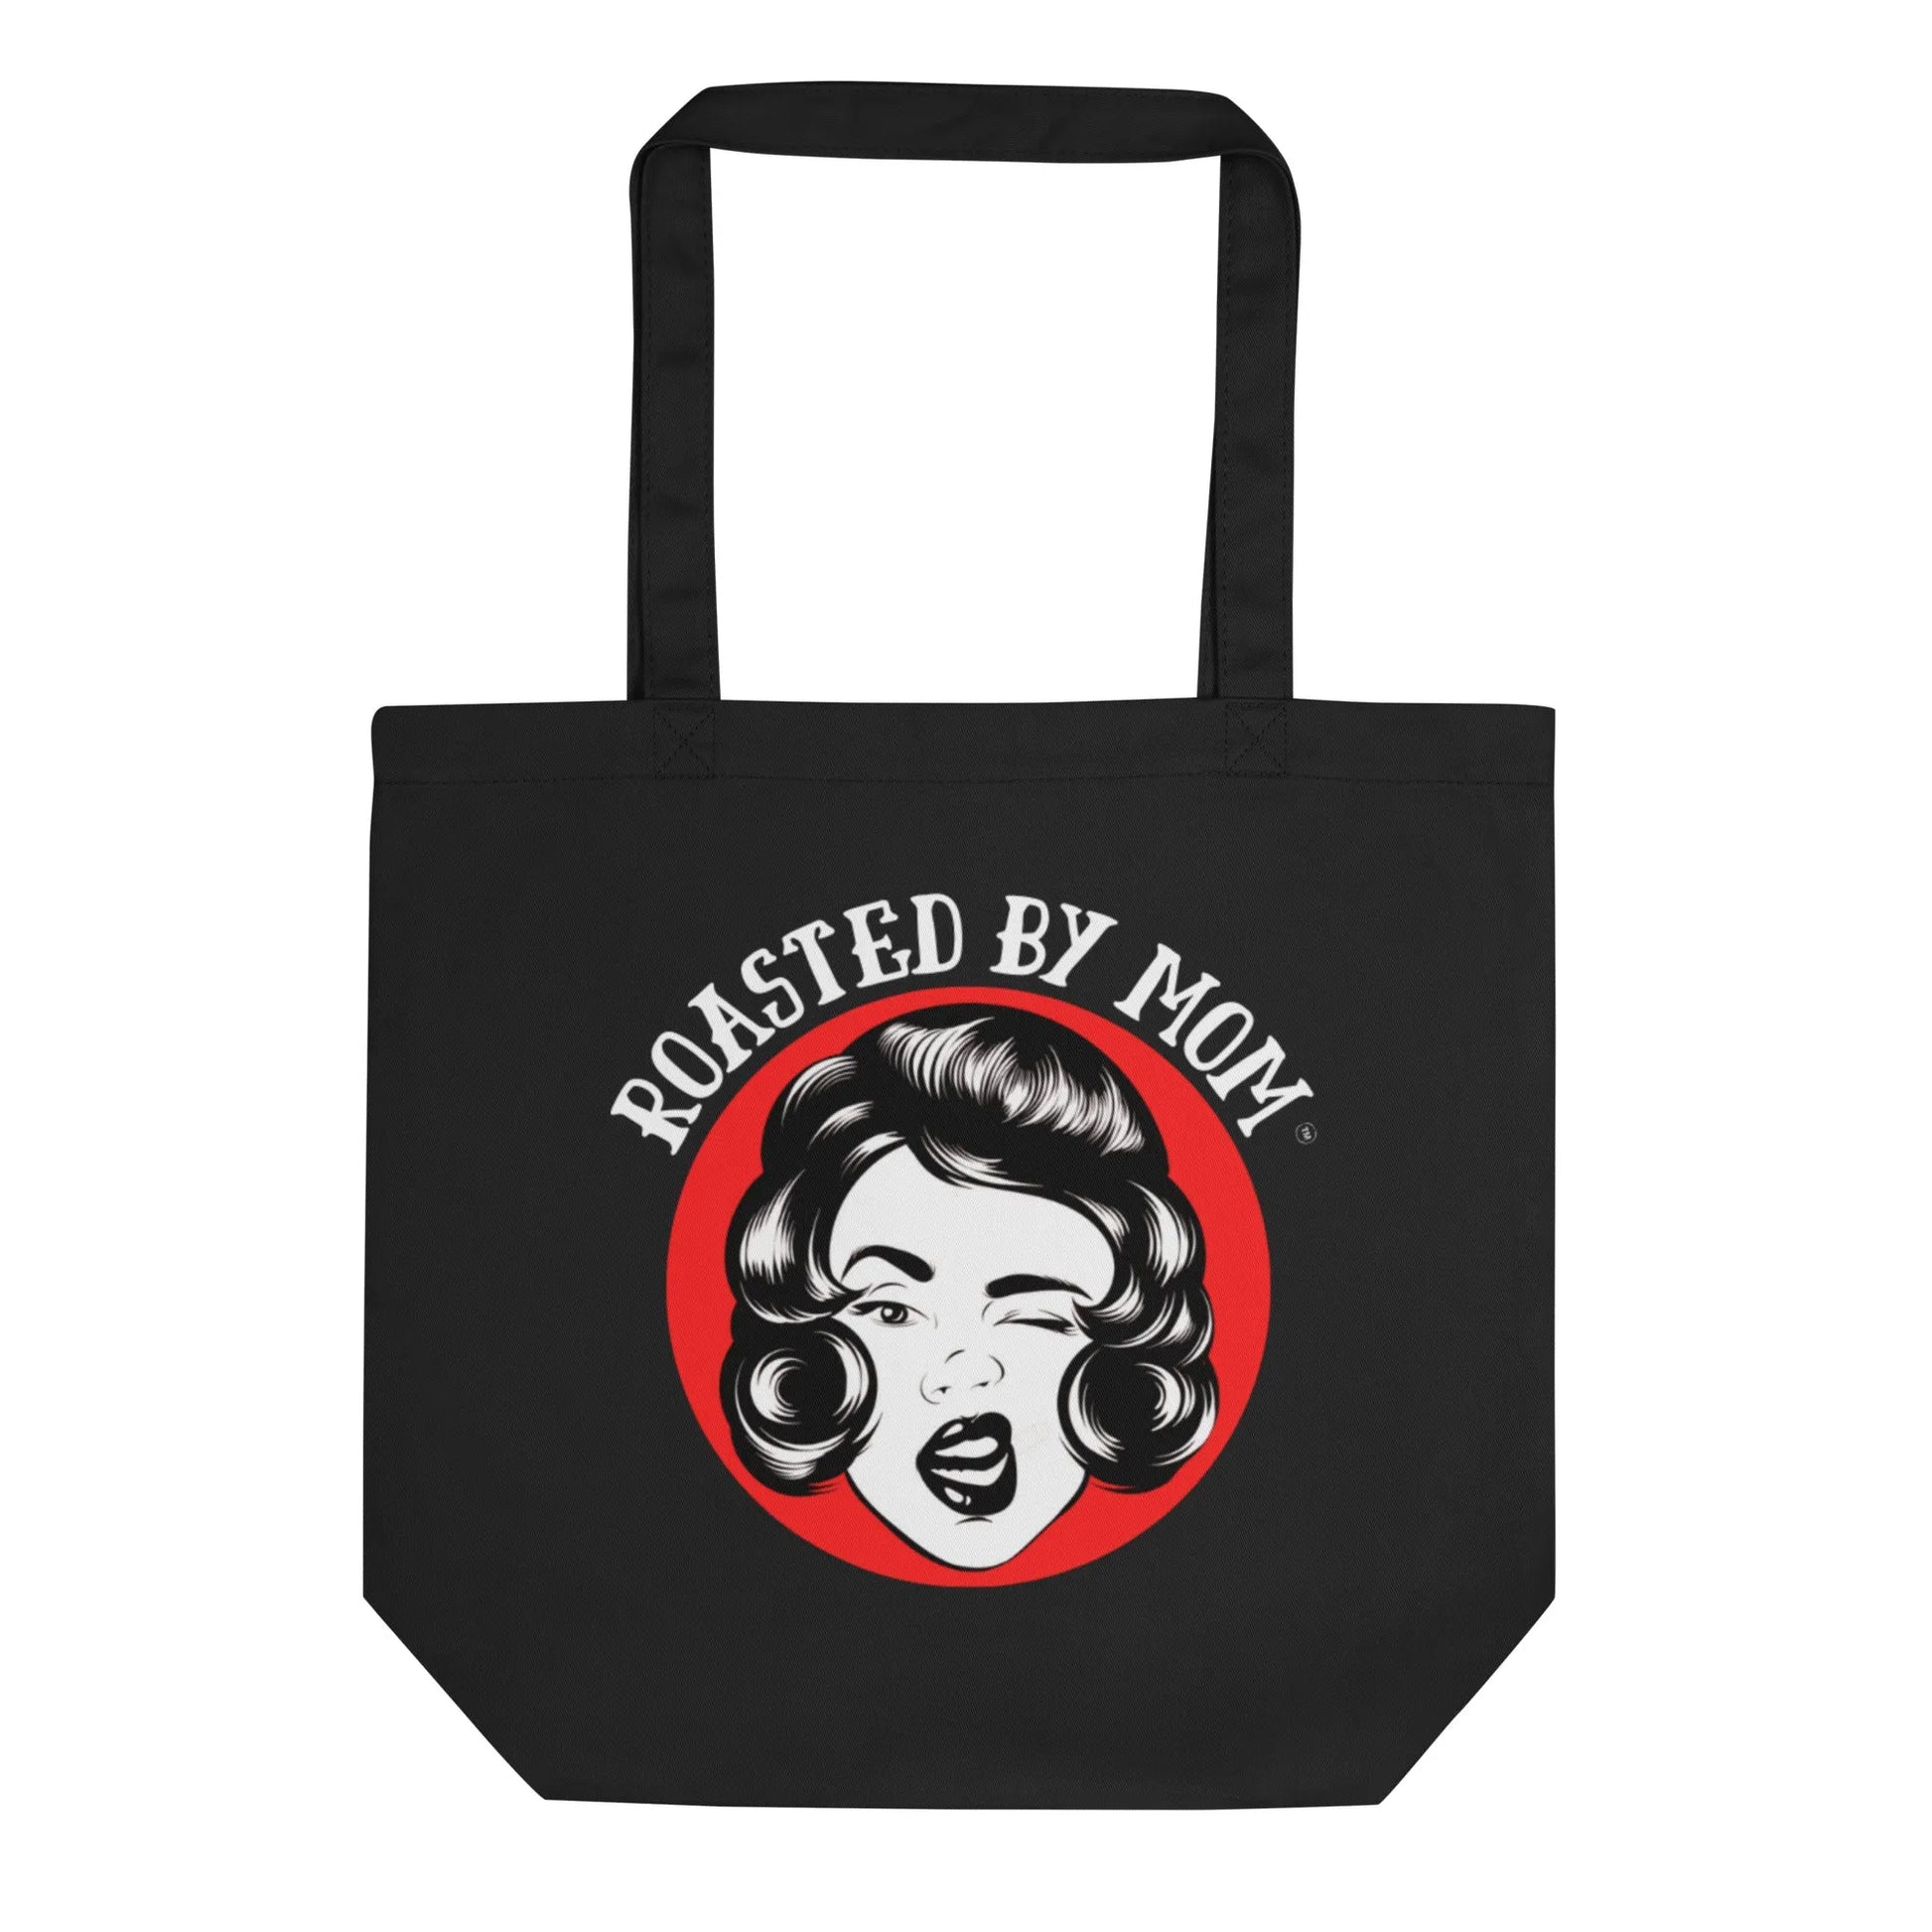 Roasted by Mom Eco Tote Bag